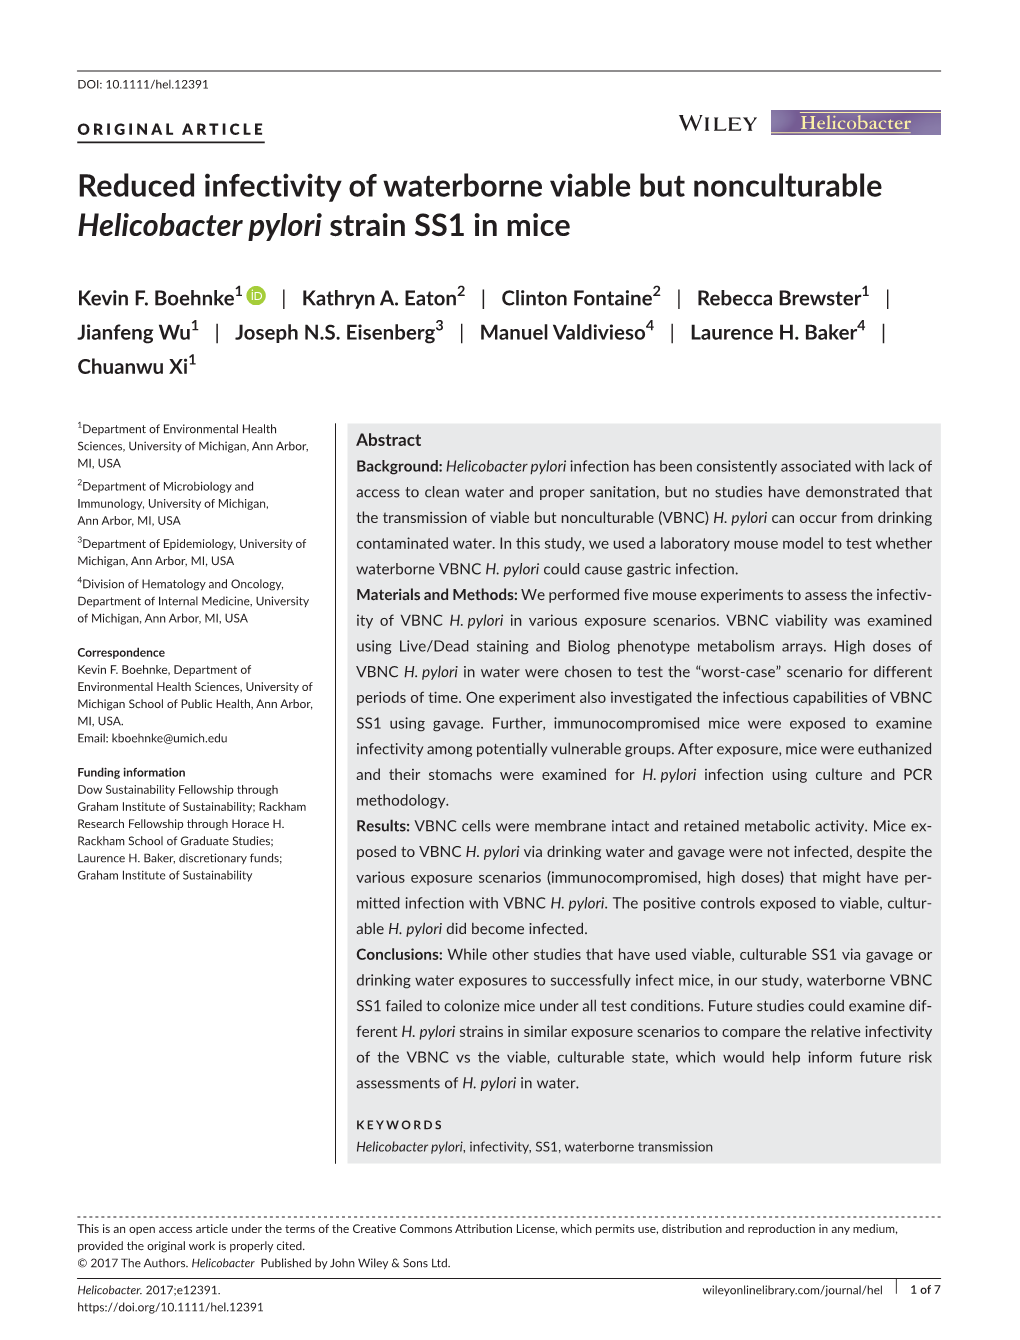 Reduced Infectivity of Waterborne Viable but Nonculturable Helicobacter Pylori Strain SS1 in Mice